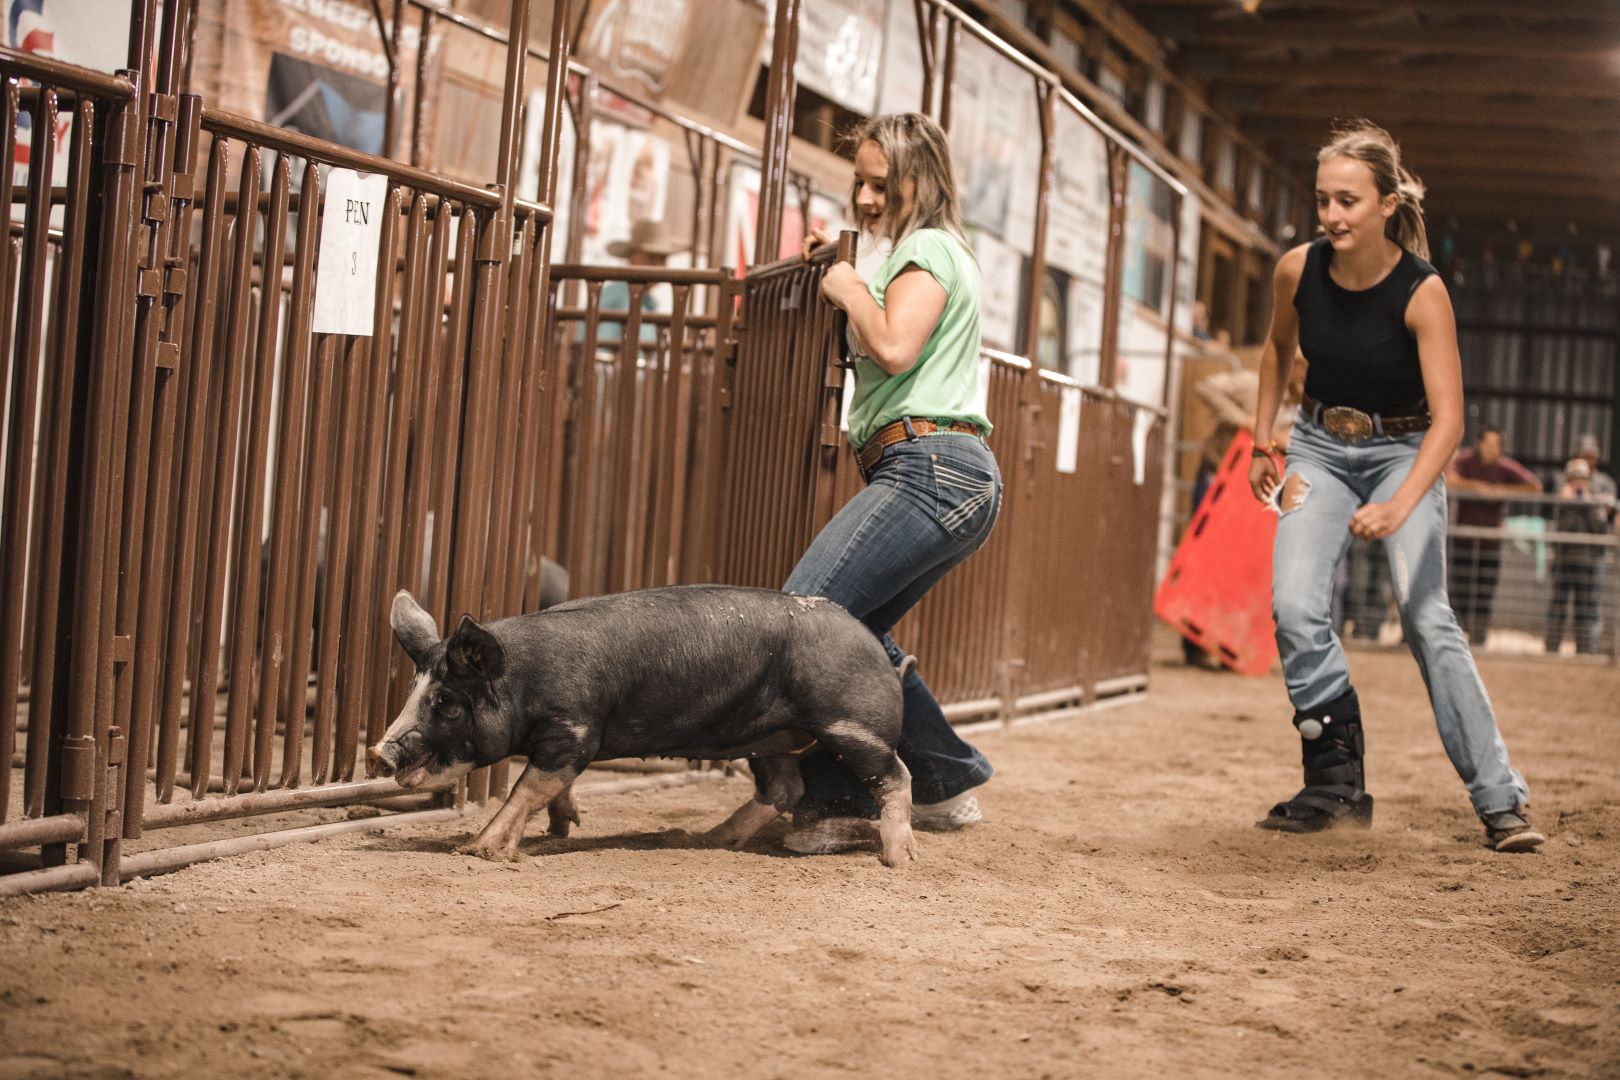 Some girls participating in the Pig Penning contest